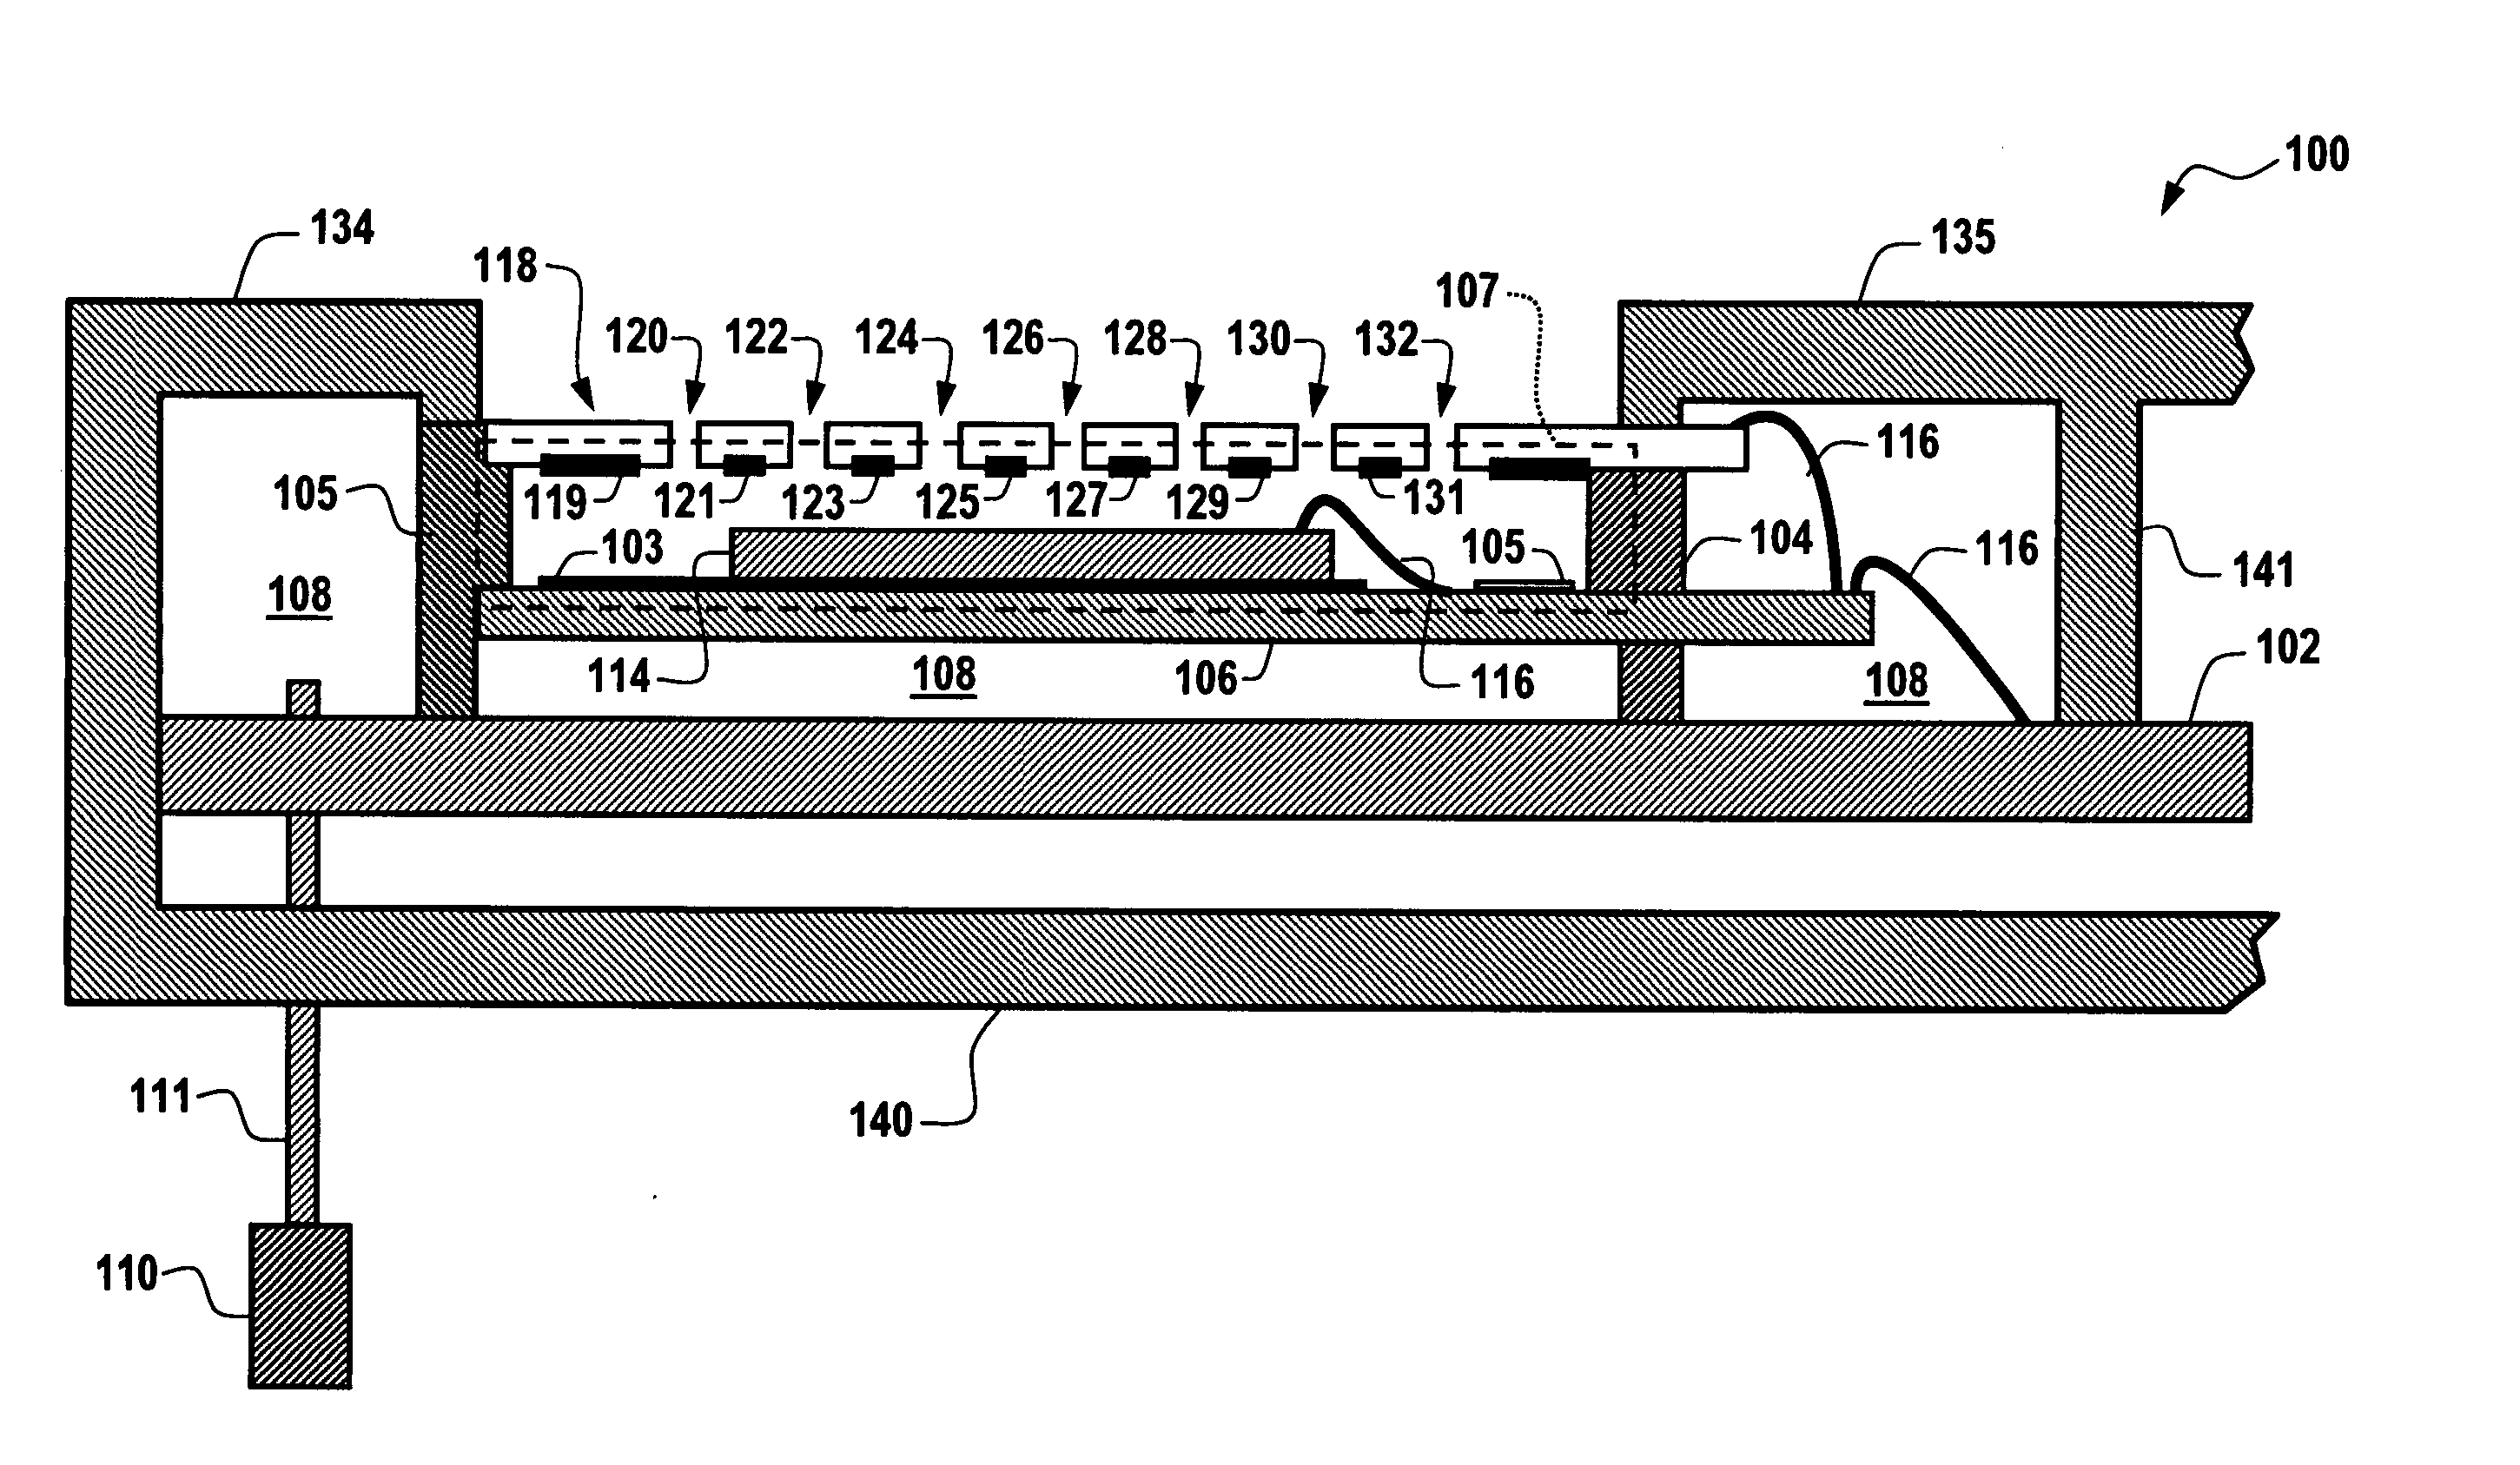 Humidity sensor for measuring supersaturated water vapor utilizing a mini-heater